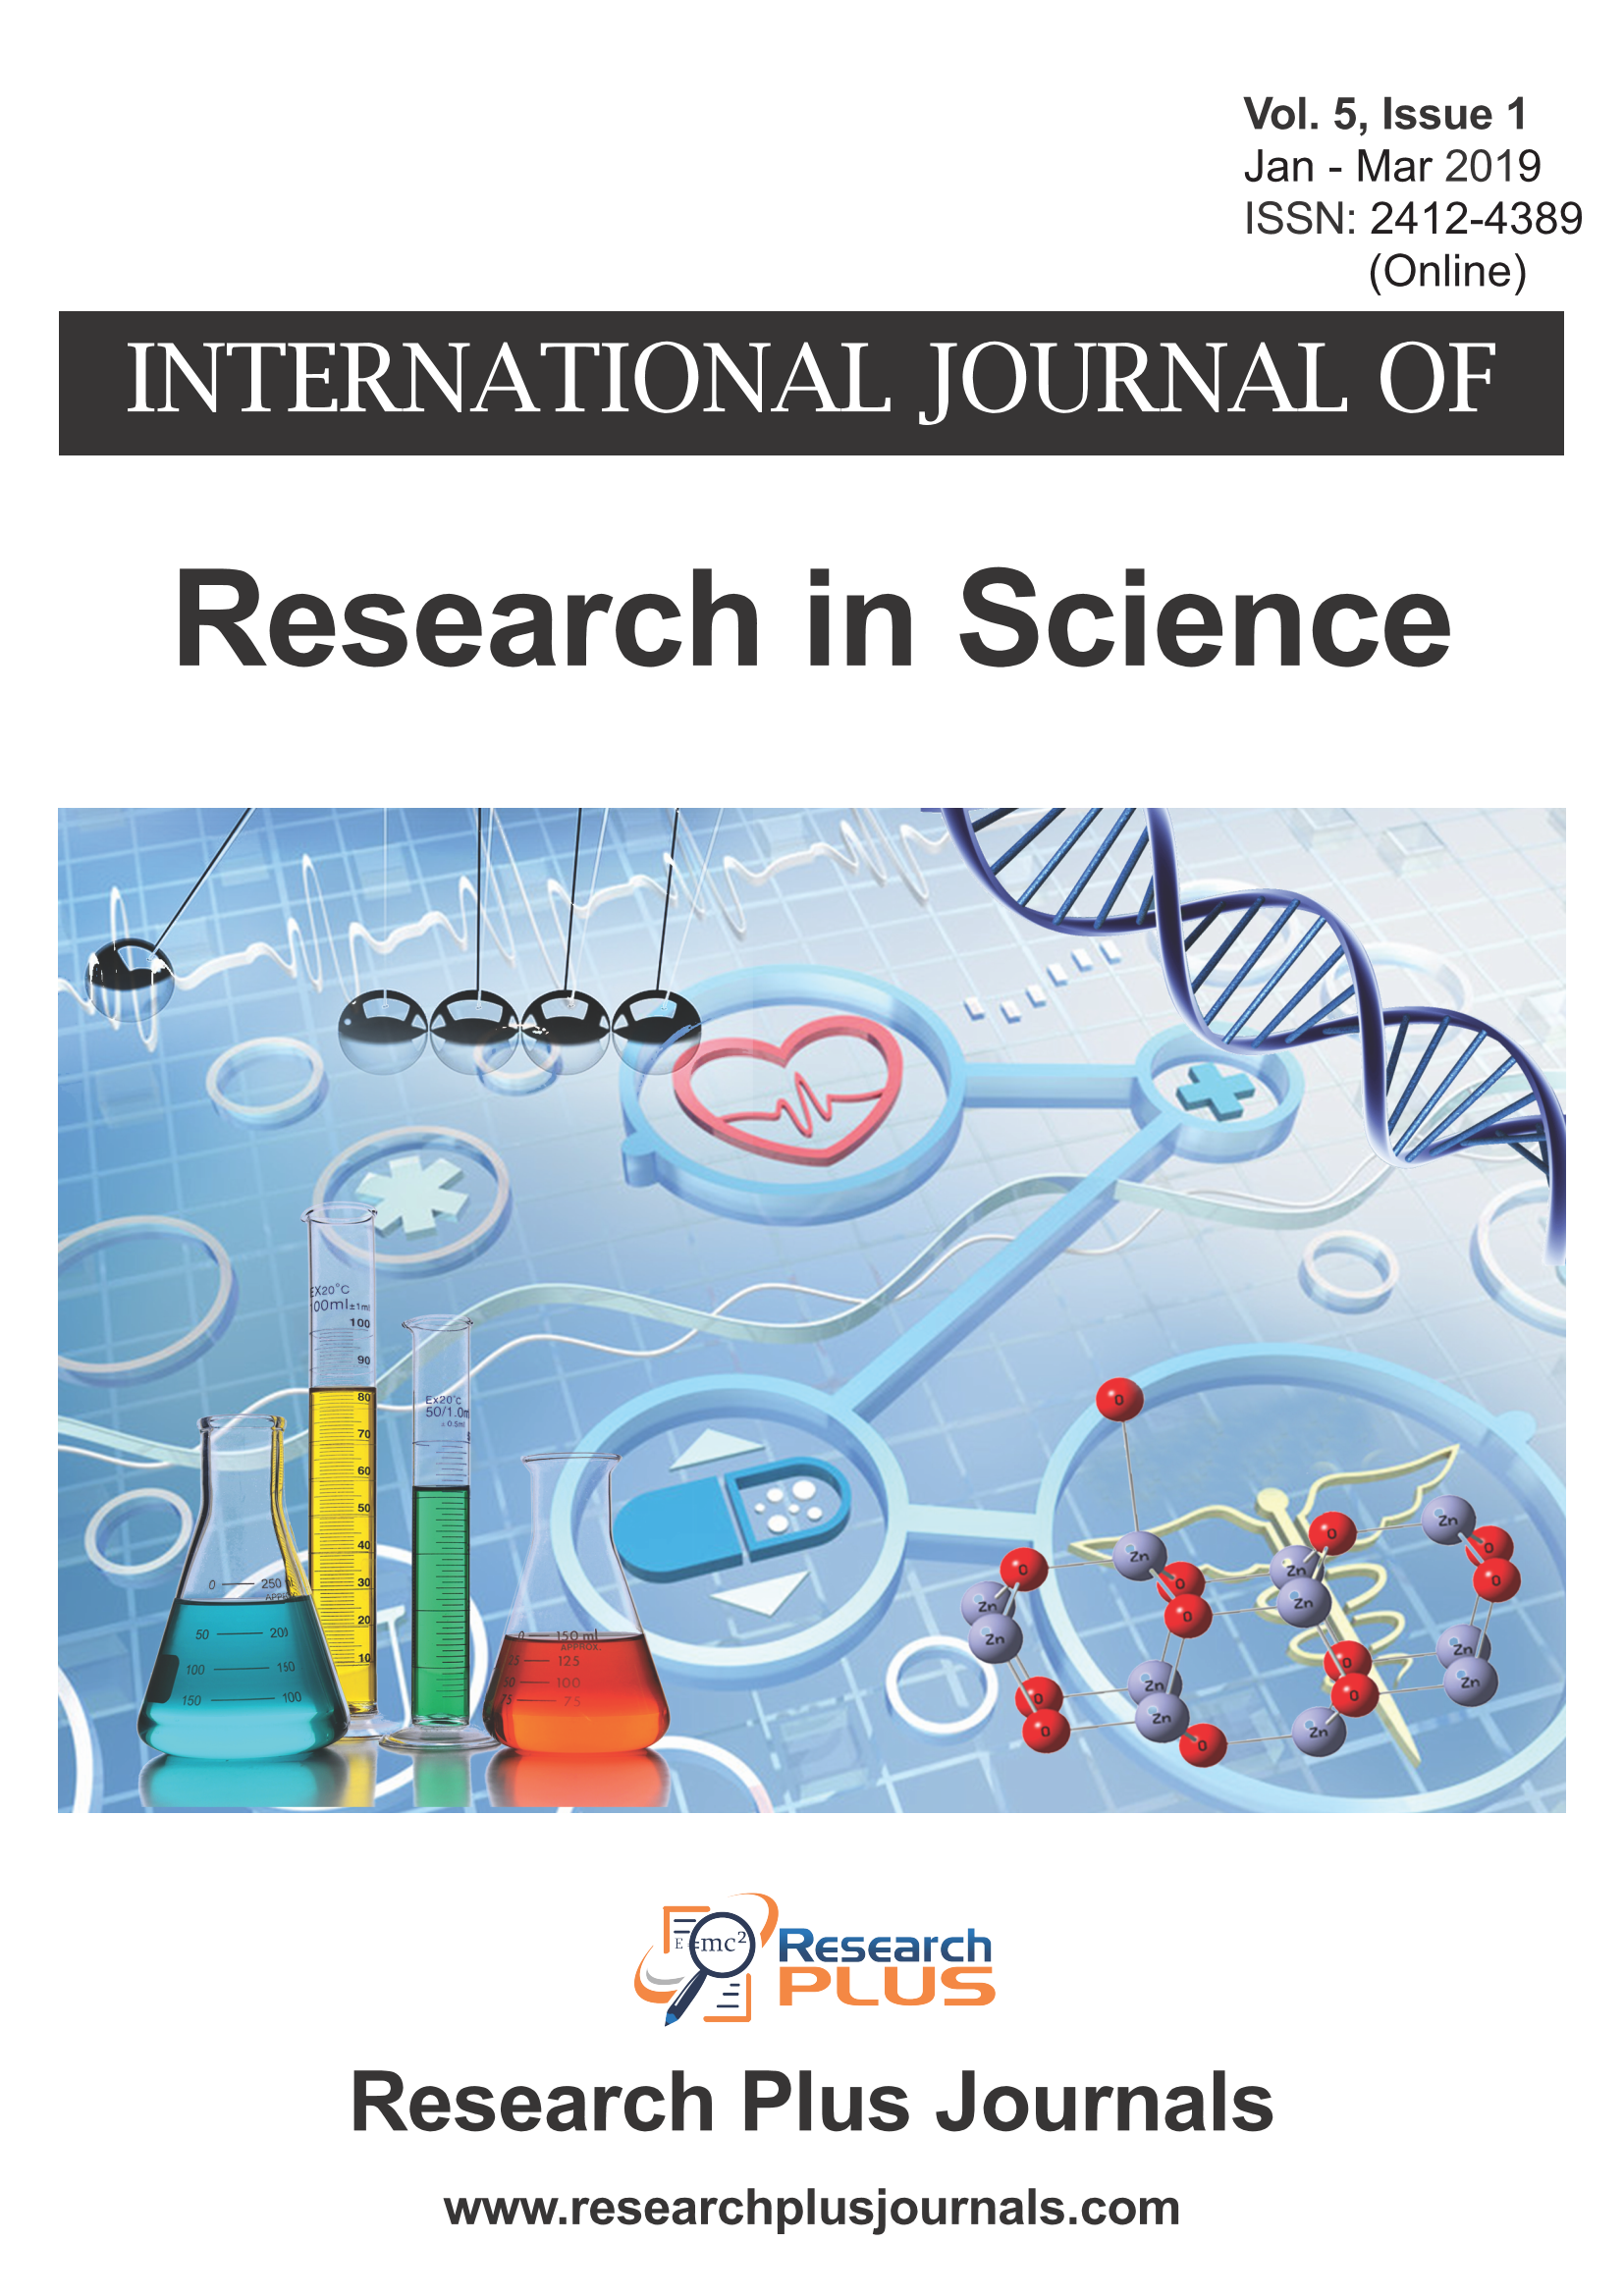 Volume 5, Issue 1, International Journal of Research in Science (IJRS) (Online ISSN 2412-4389)